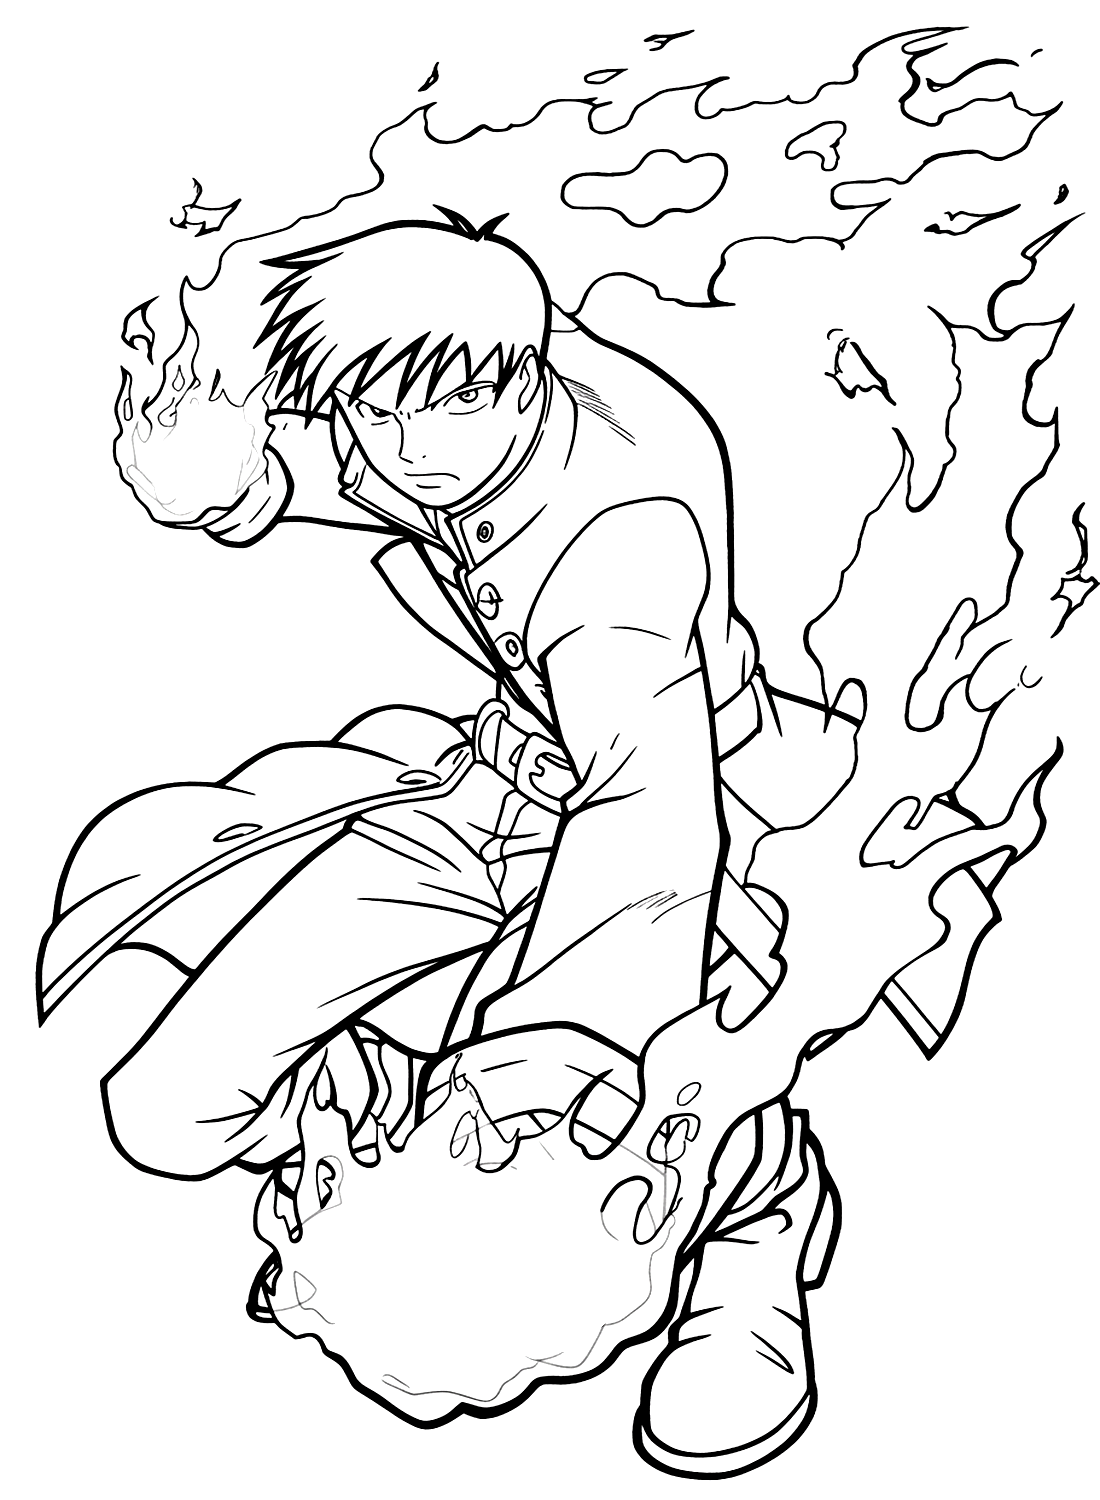 Roy Mustang Action Coloring Page PDF from Roy Mustang